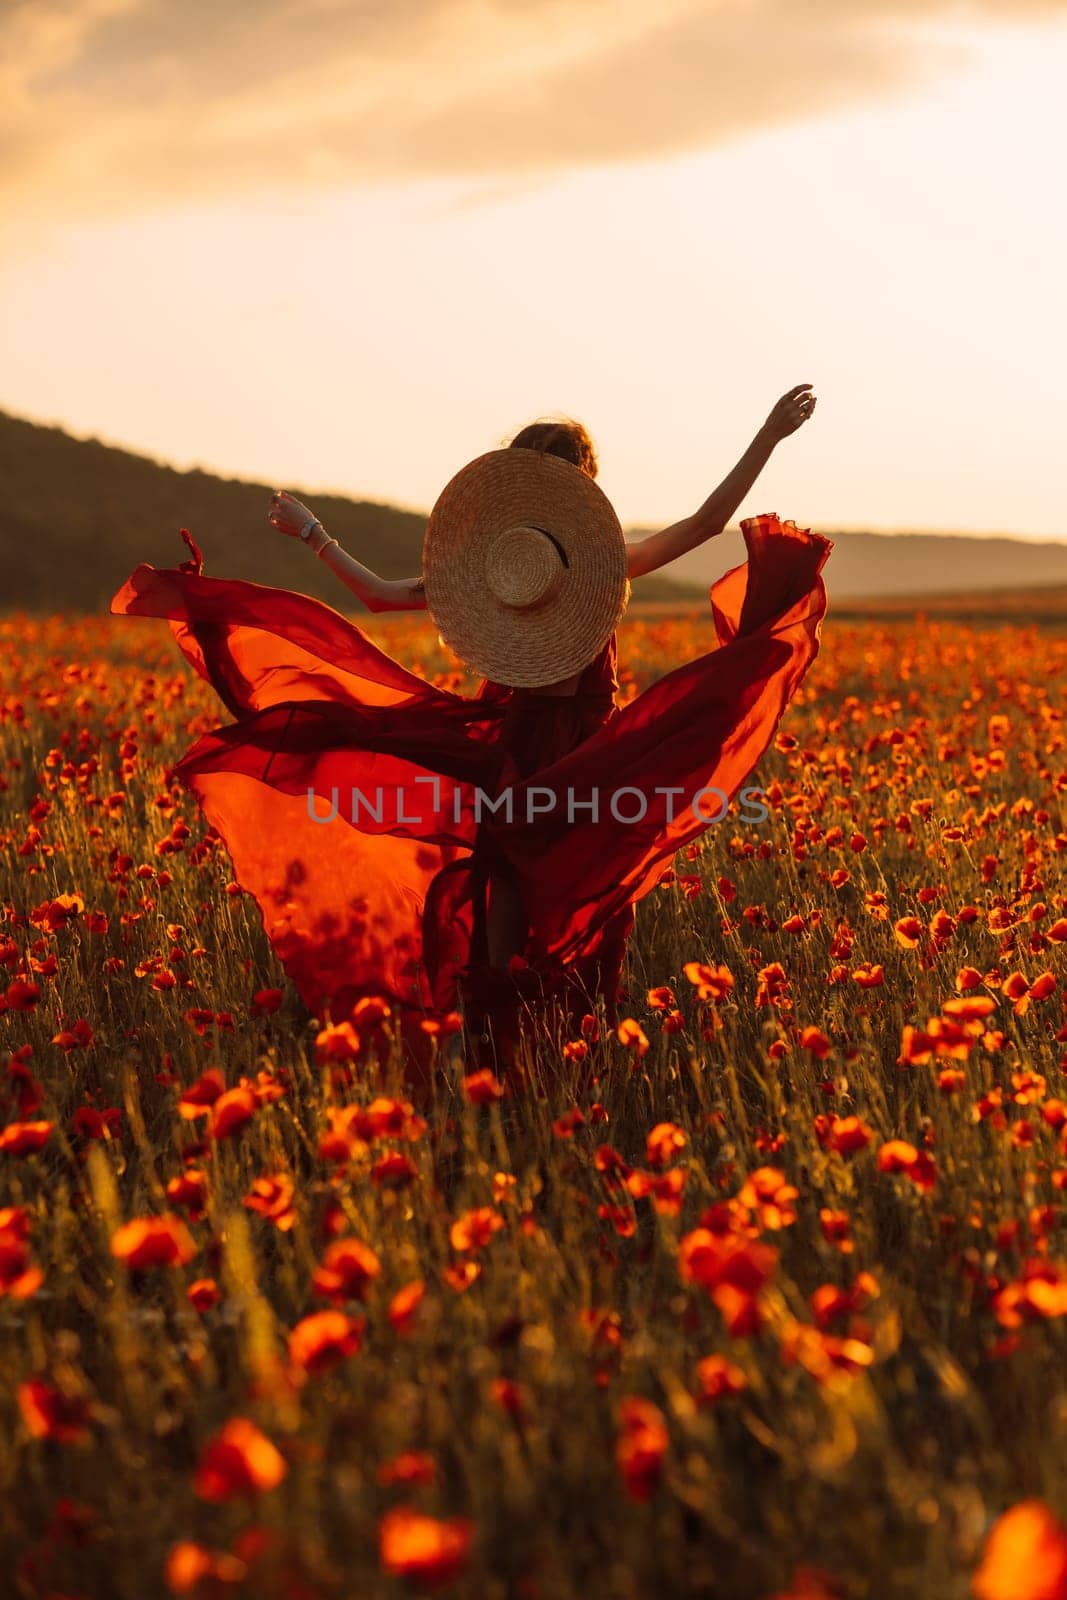 A woman in a red dress is running through a field of red flowers. She is wearing a straw hat and has her arms outstretched. The scene is bright and cheerful, with the sun shining down on the flowers. by Matiunina